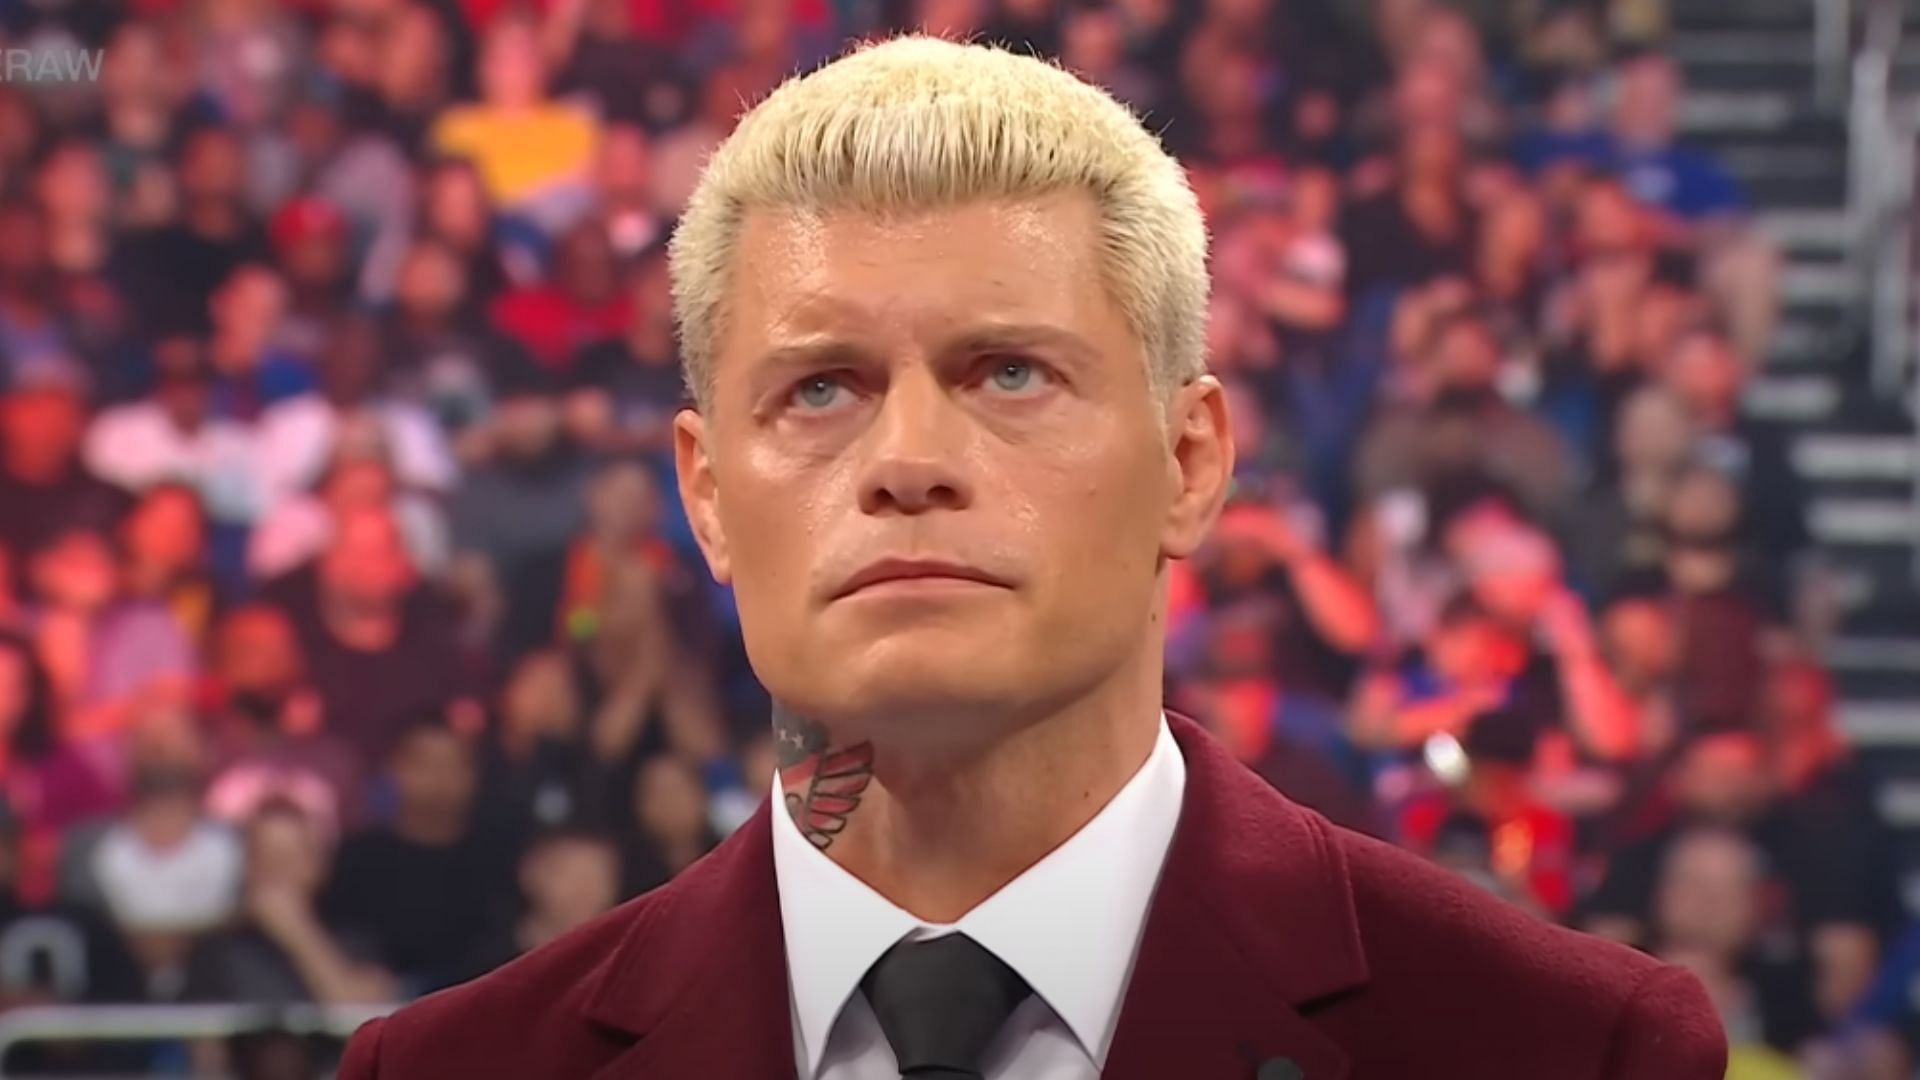 Cody Rhodes is a member of the WWE RAW roster